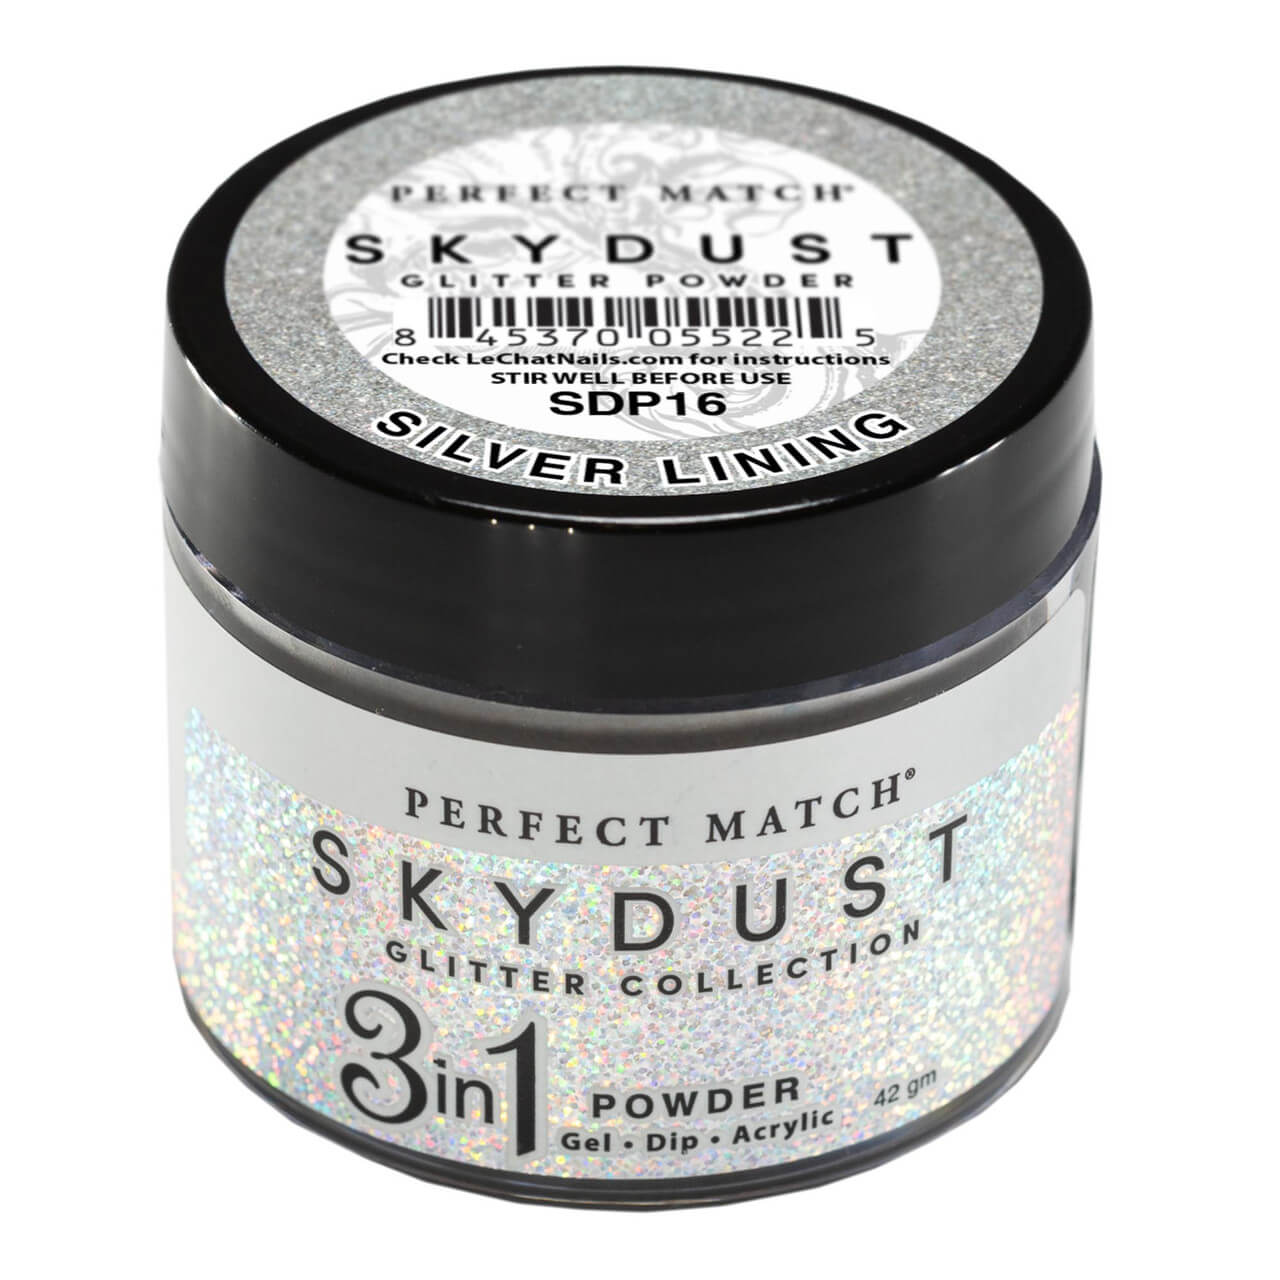 LeChat Perfect Match Sky Dust Glitter Powder - Silver Lining 1.48 oz - #SDP16 - Premier Nail Supply 